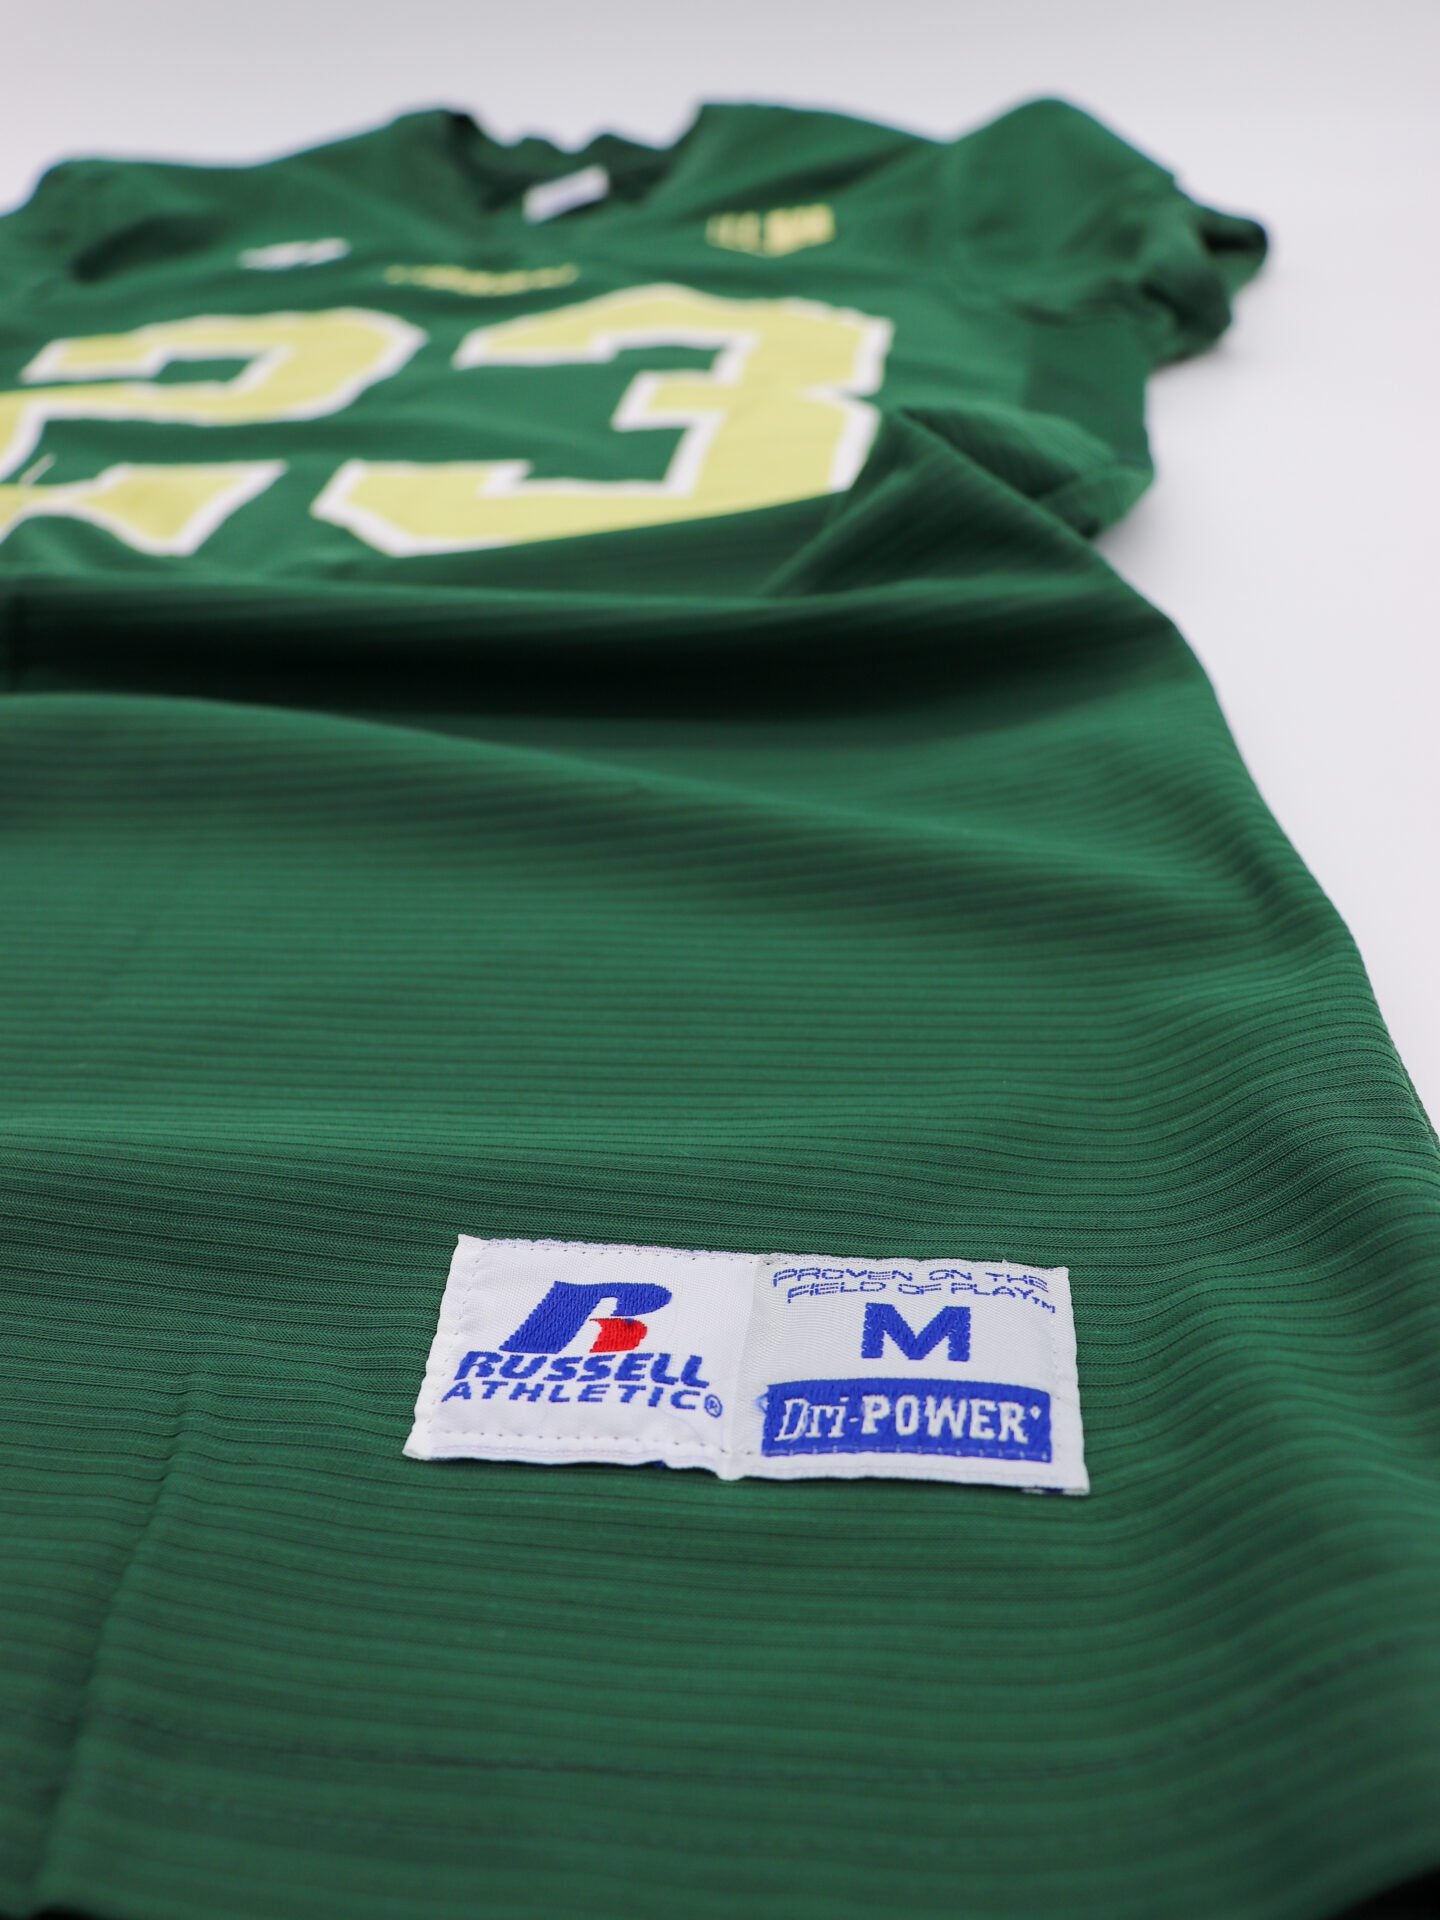 Game Worn 2014 #23 Bernard Blake Home Green Colorado State Rams Football Jersey, Russell Athletic Size M